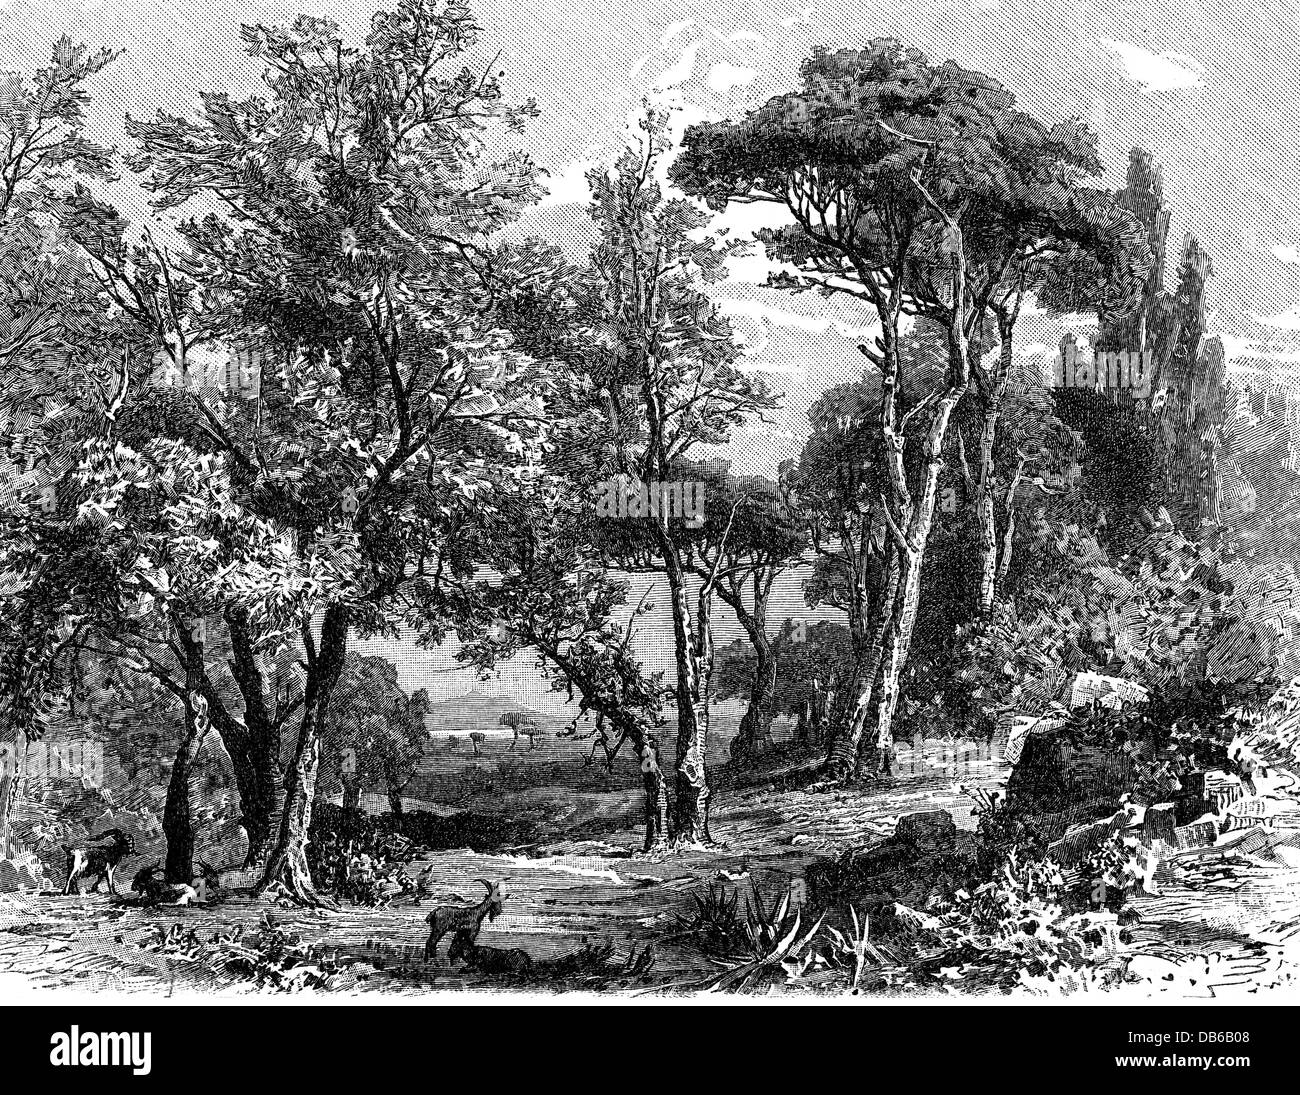 botany, trees, olive trees (Olea europaea) and stone pines (Pinus pinea), wood engraving, 19th century, landscape, tree, plant, plants, historic, historical, Additional-Rights-Clearences-Not Available Stock Photo